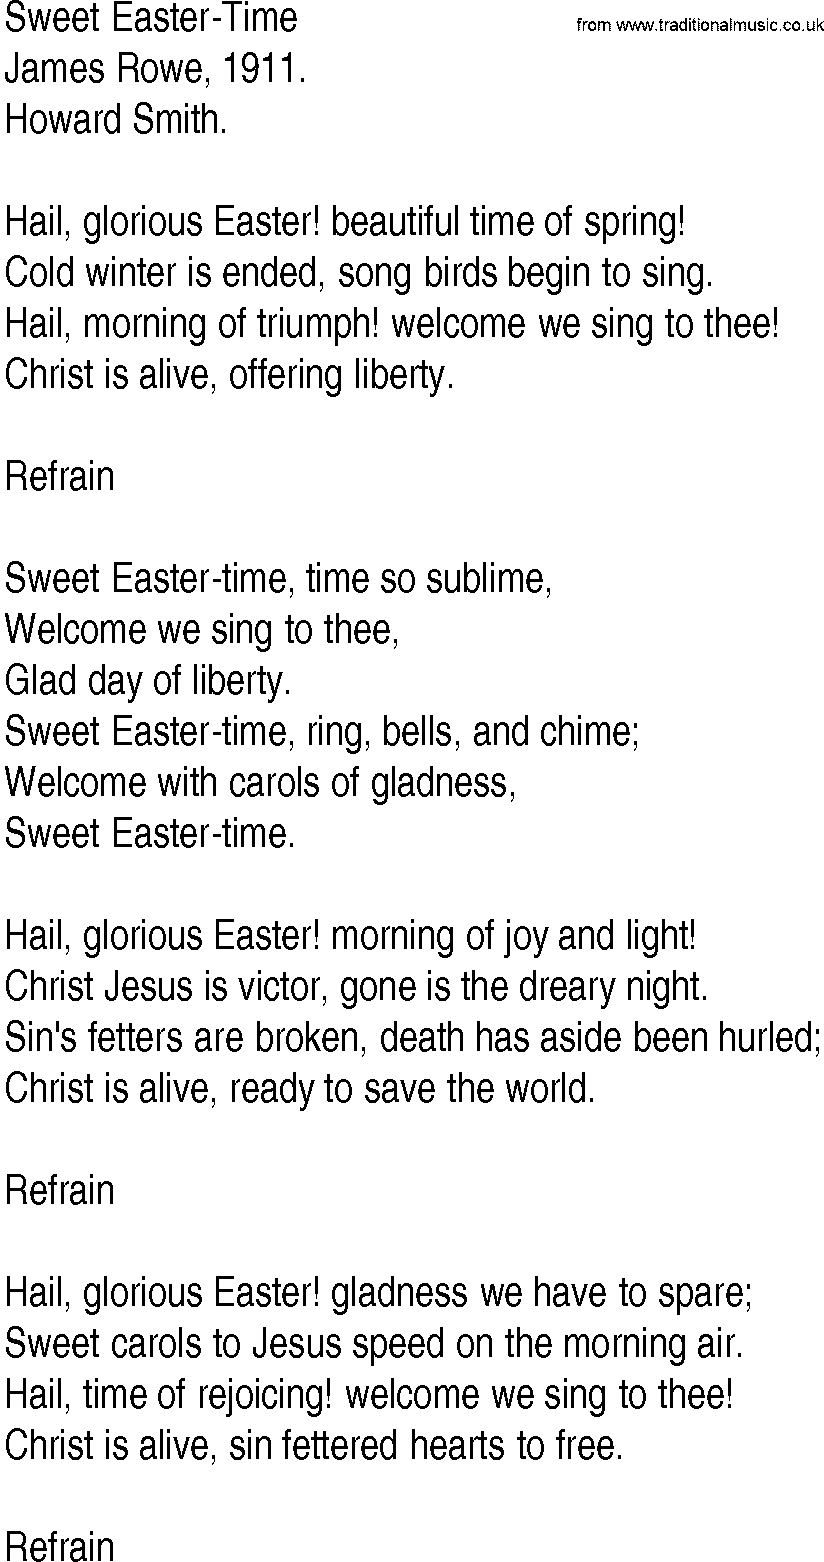 Hymn and Gospel Song: Sweet Easter-Time by James Rowe lyrics